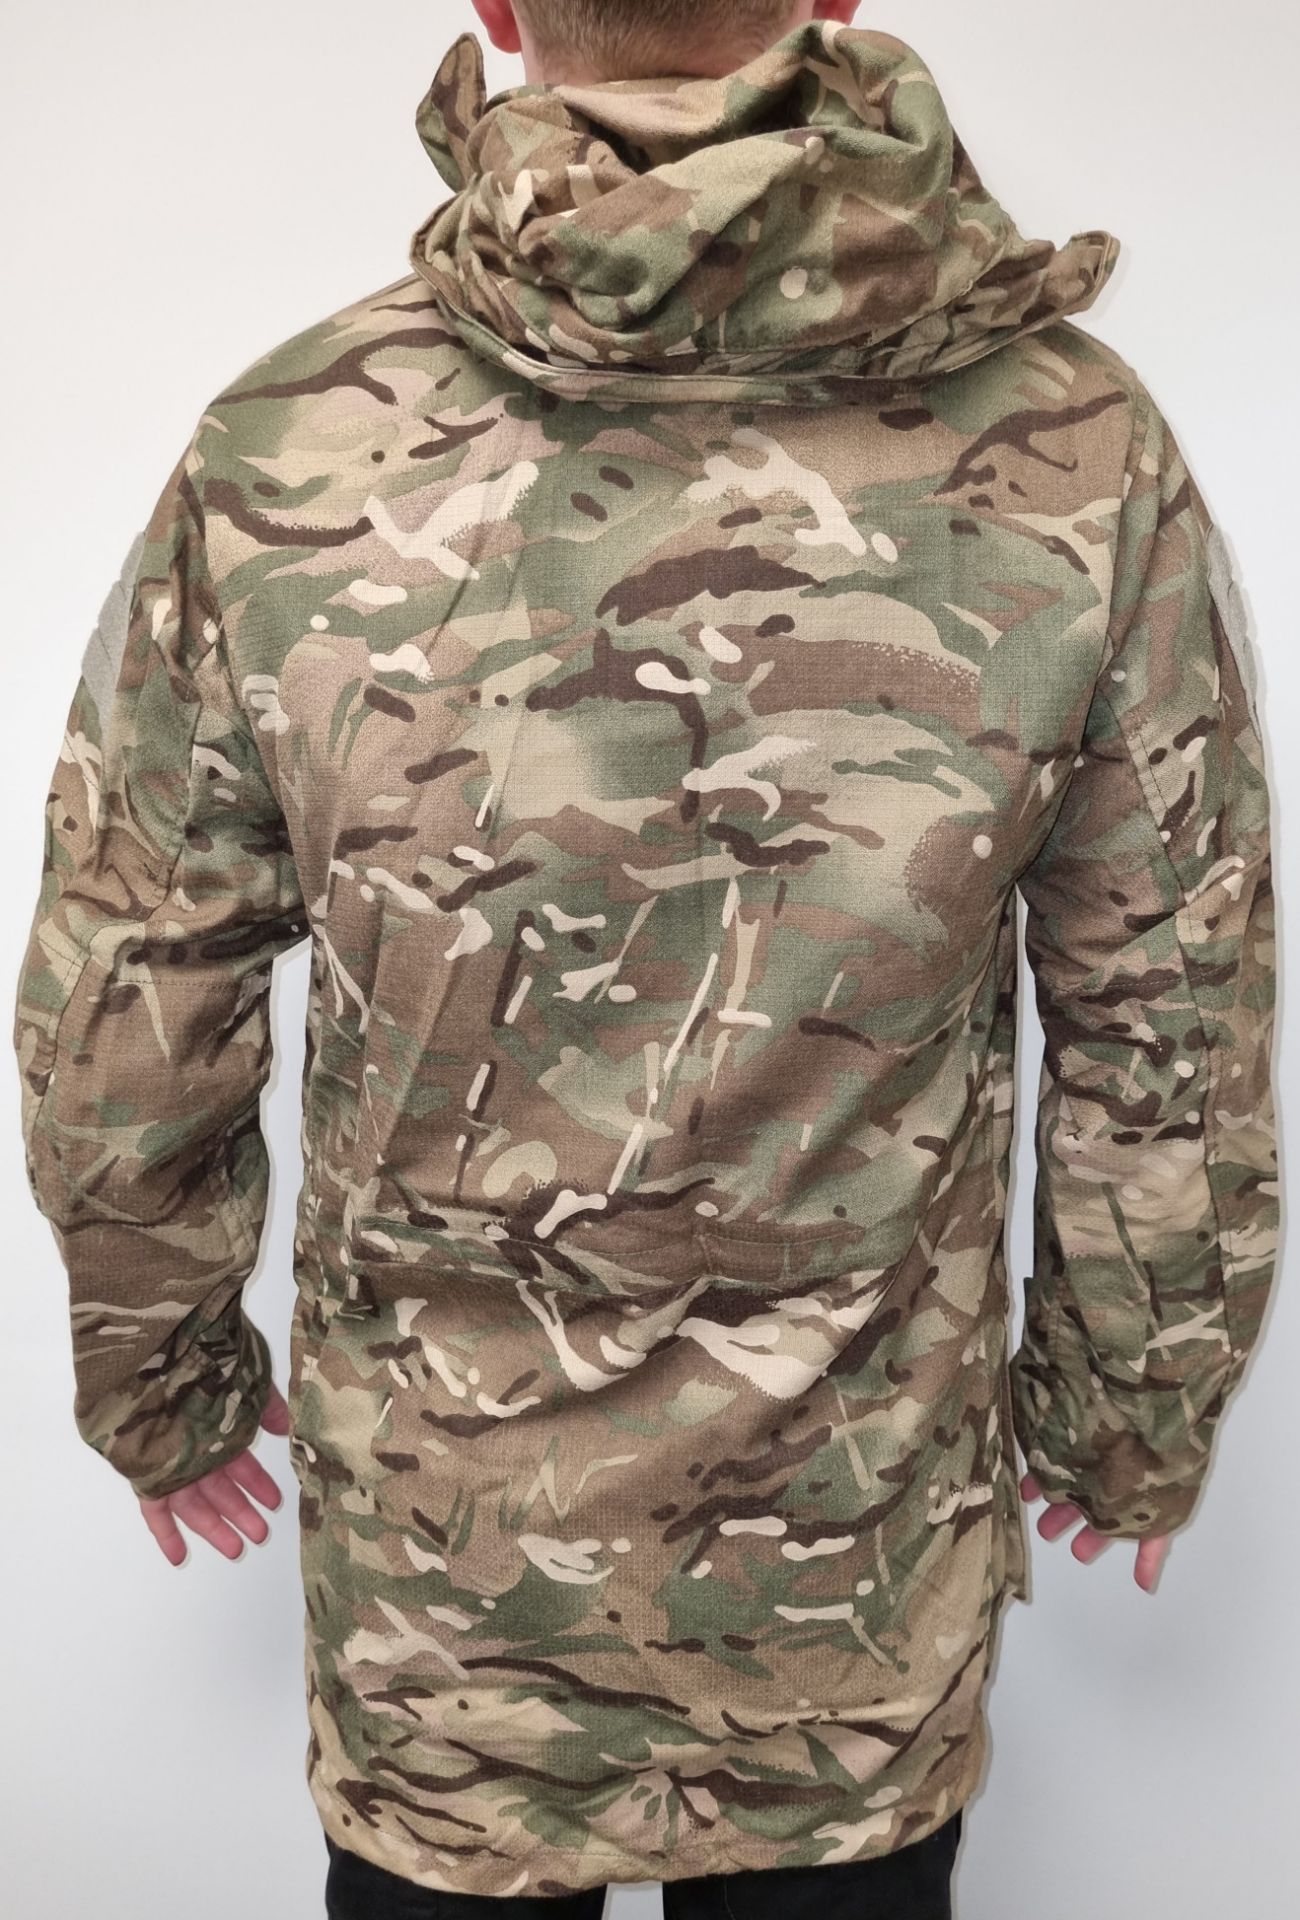 25x British Army MTP windproof smocks - mixed grades and sizes - Image 3 of 10